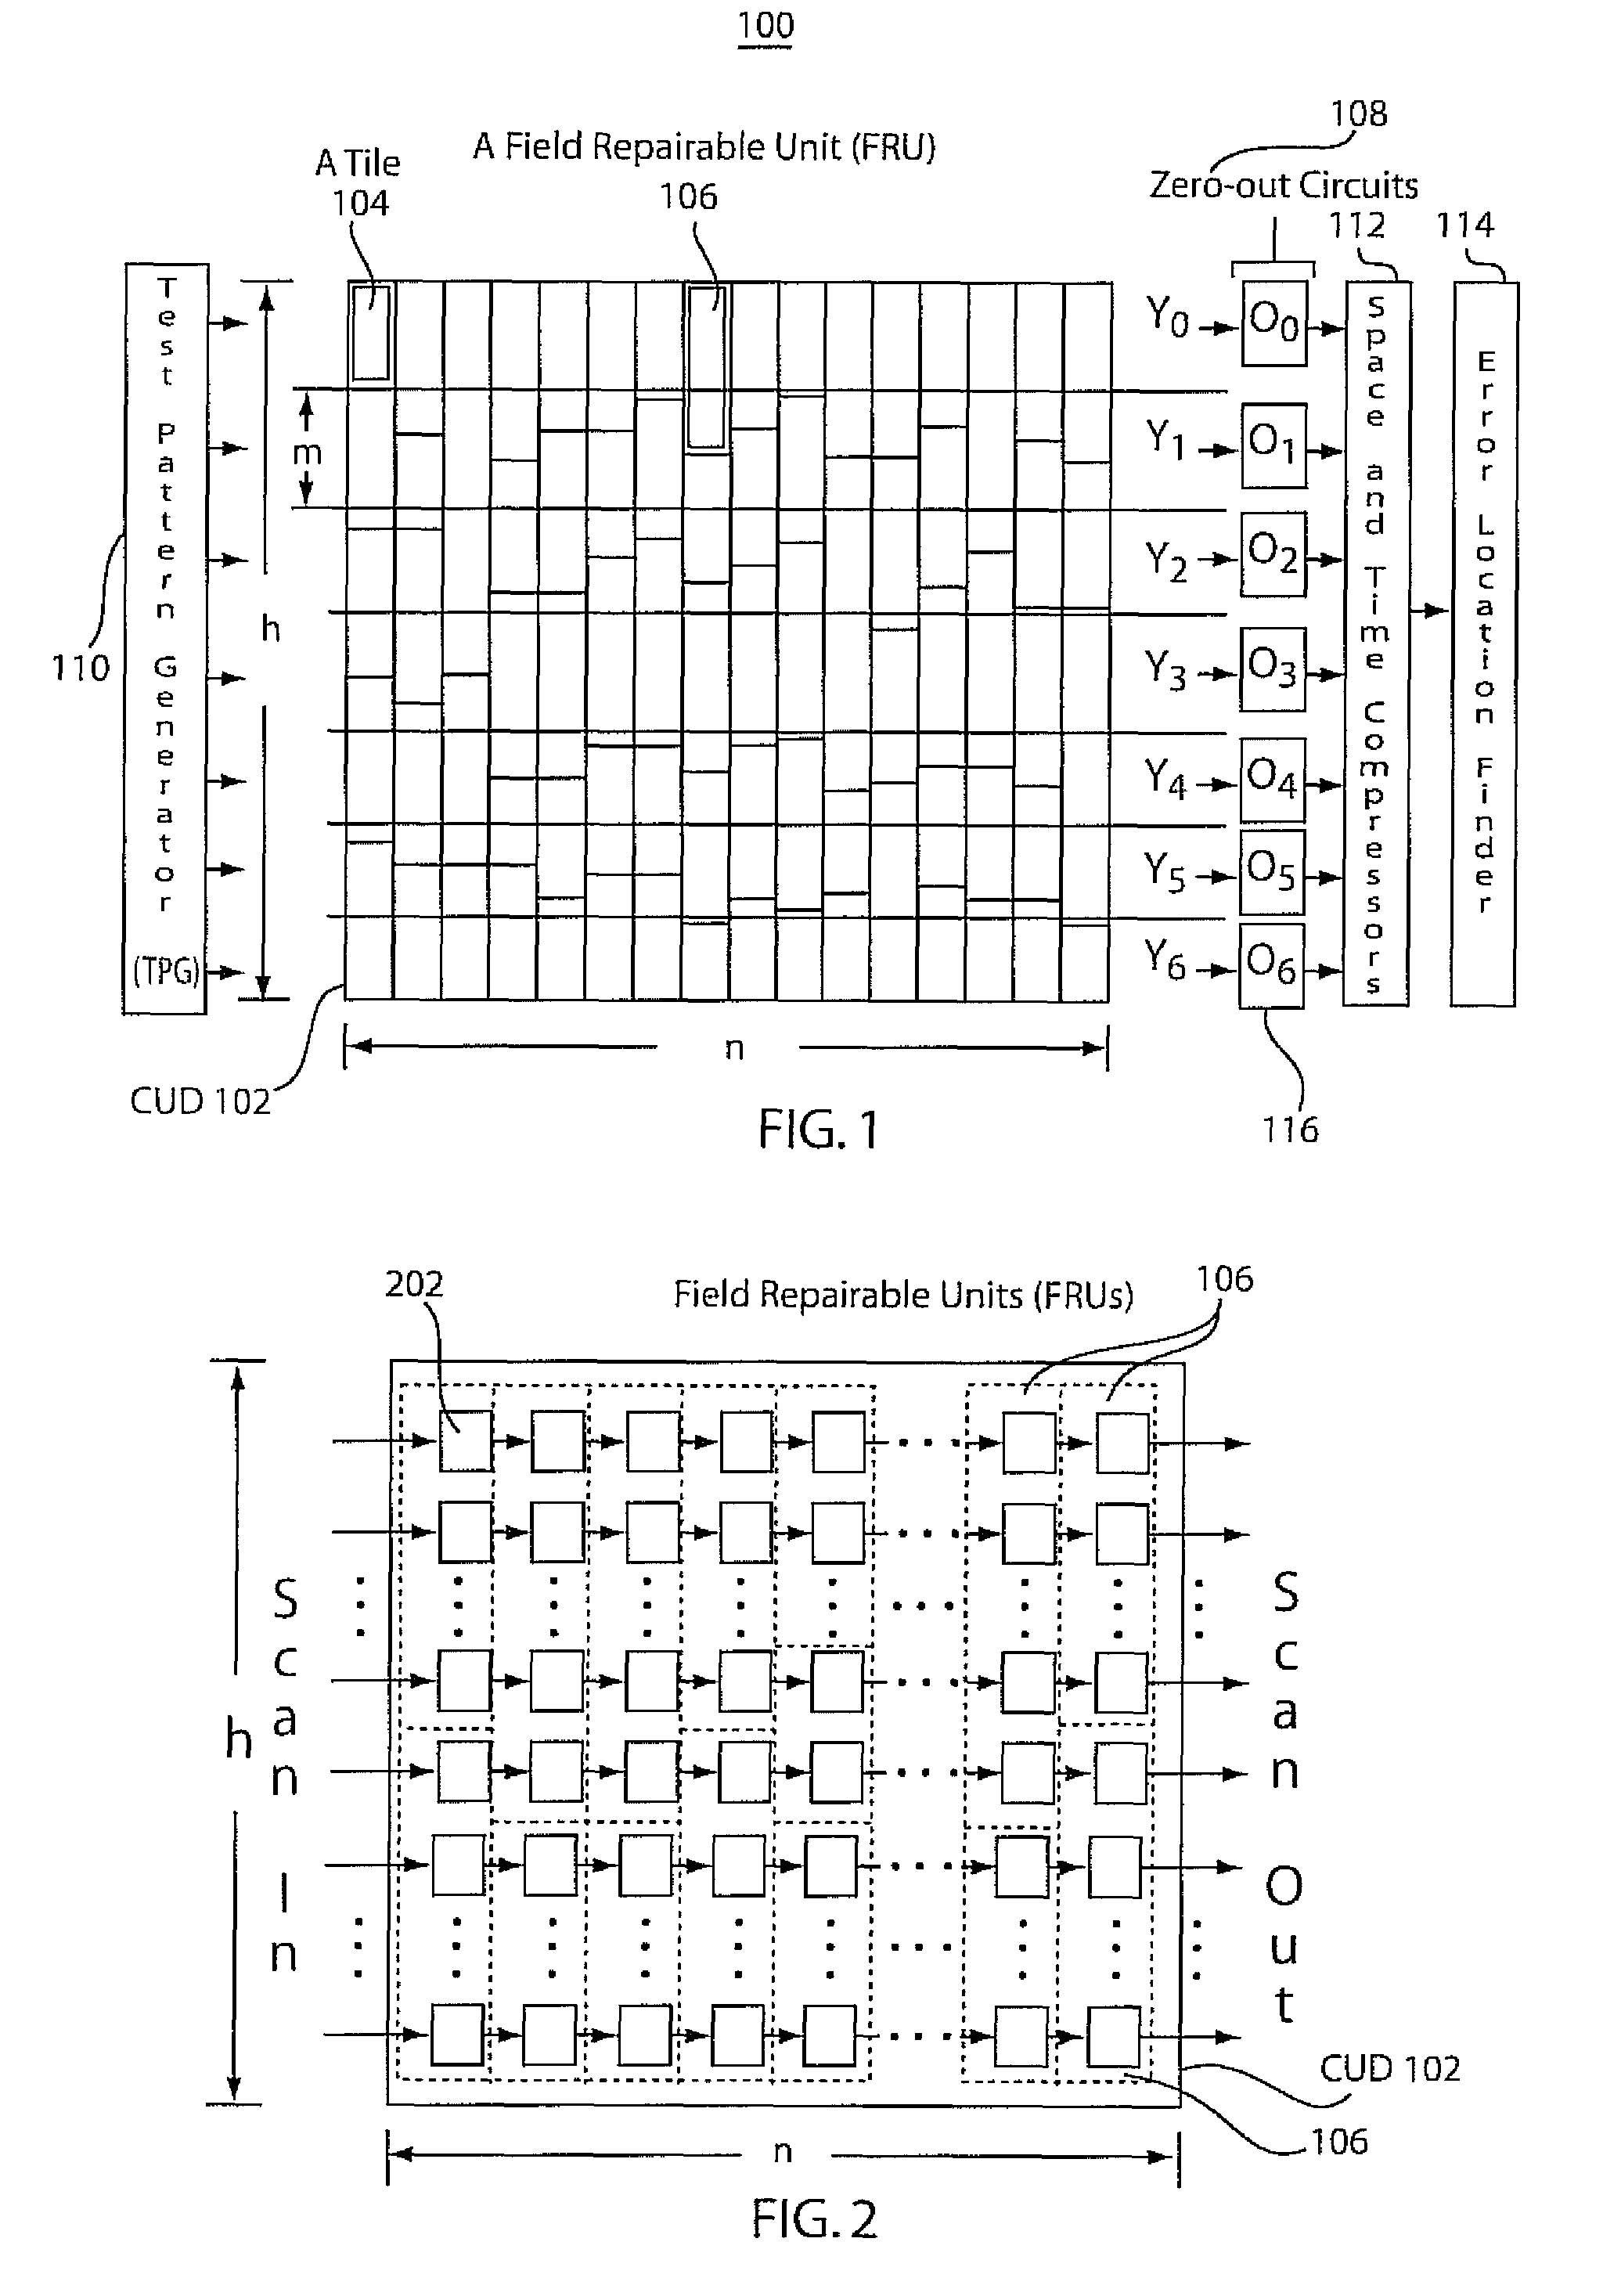 Systems and methods for locating defective components of a circuit